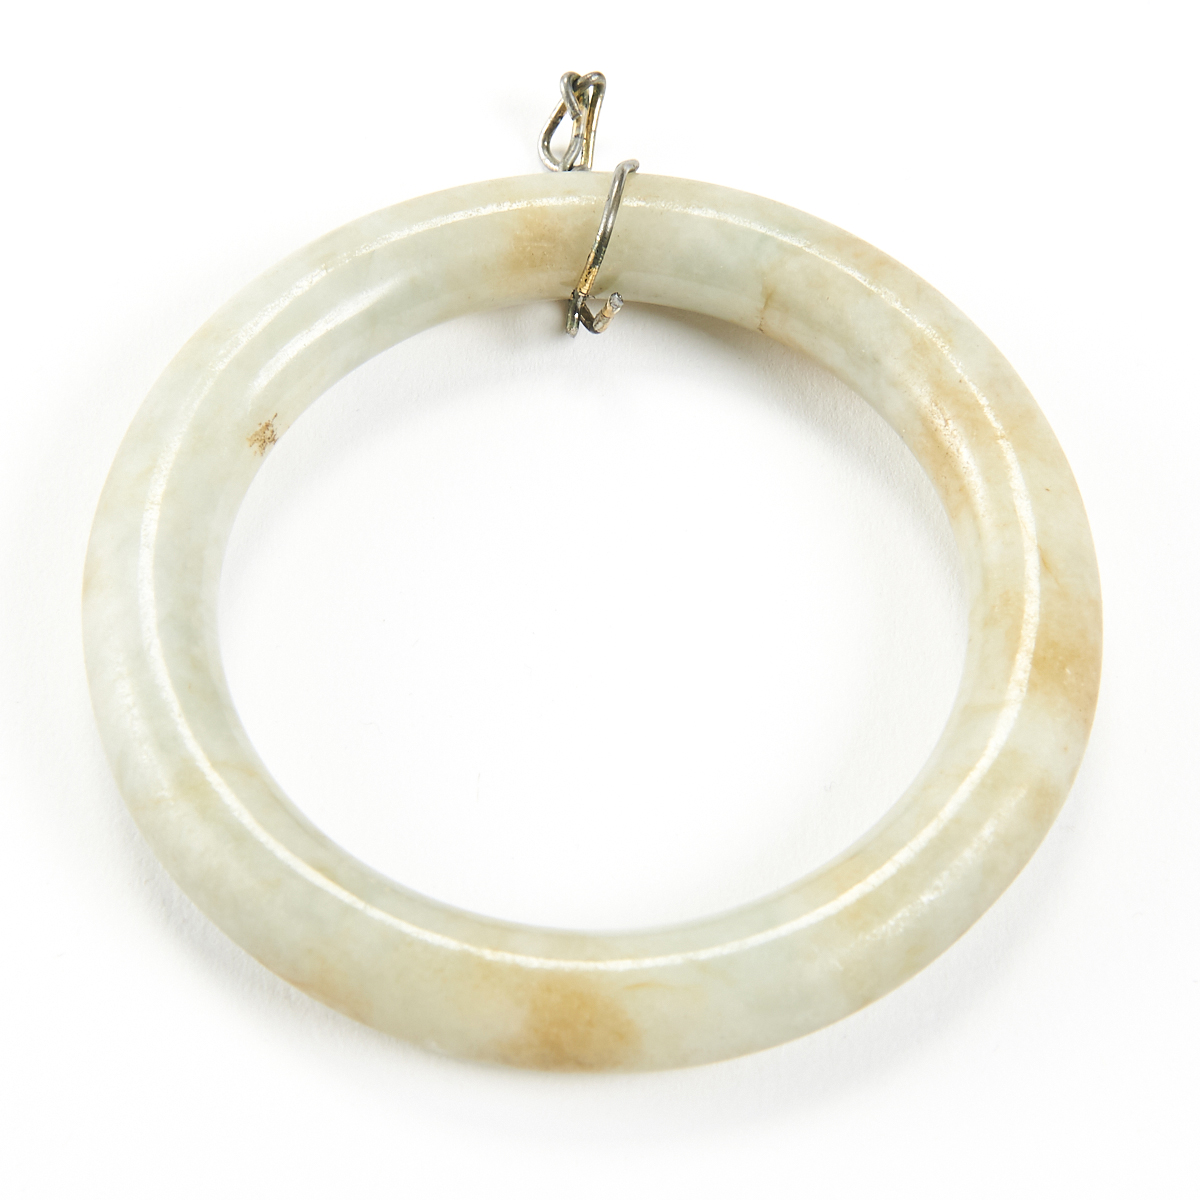 Chinese Carved Jade Bangle Bracelet - Stand - Image 2 of 8